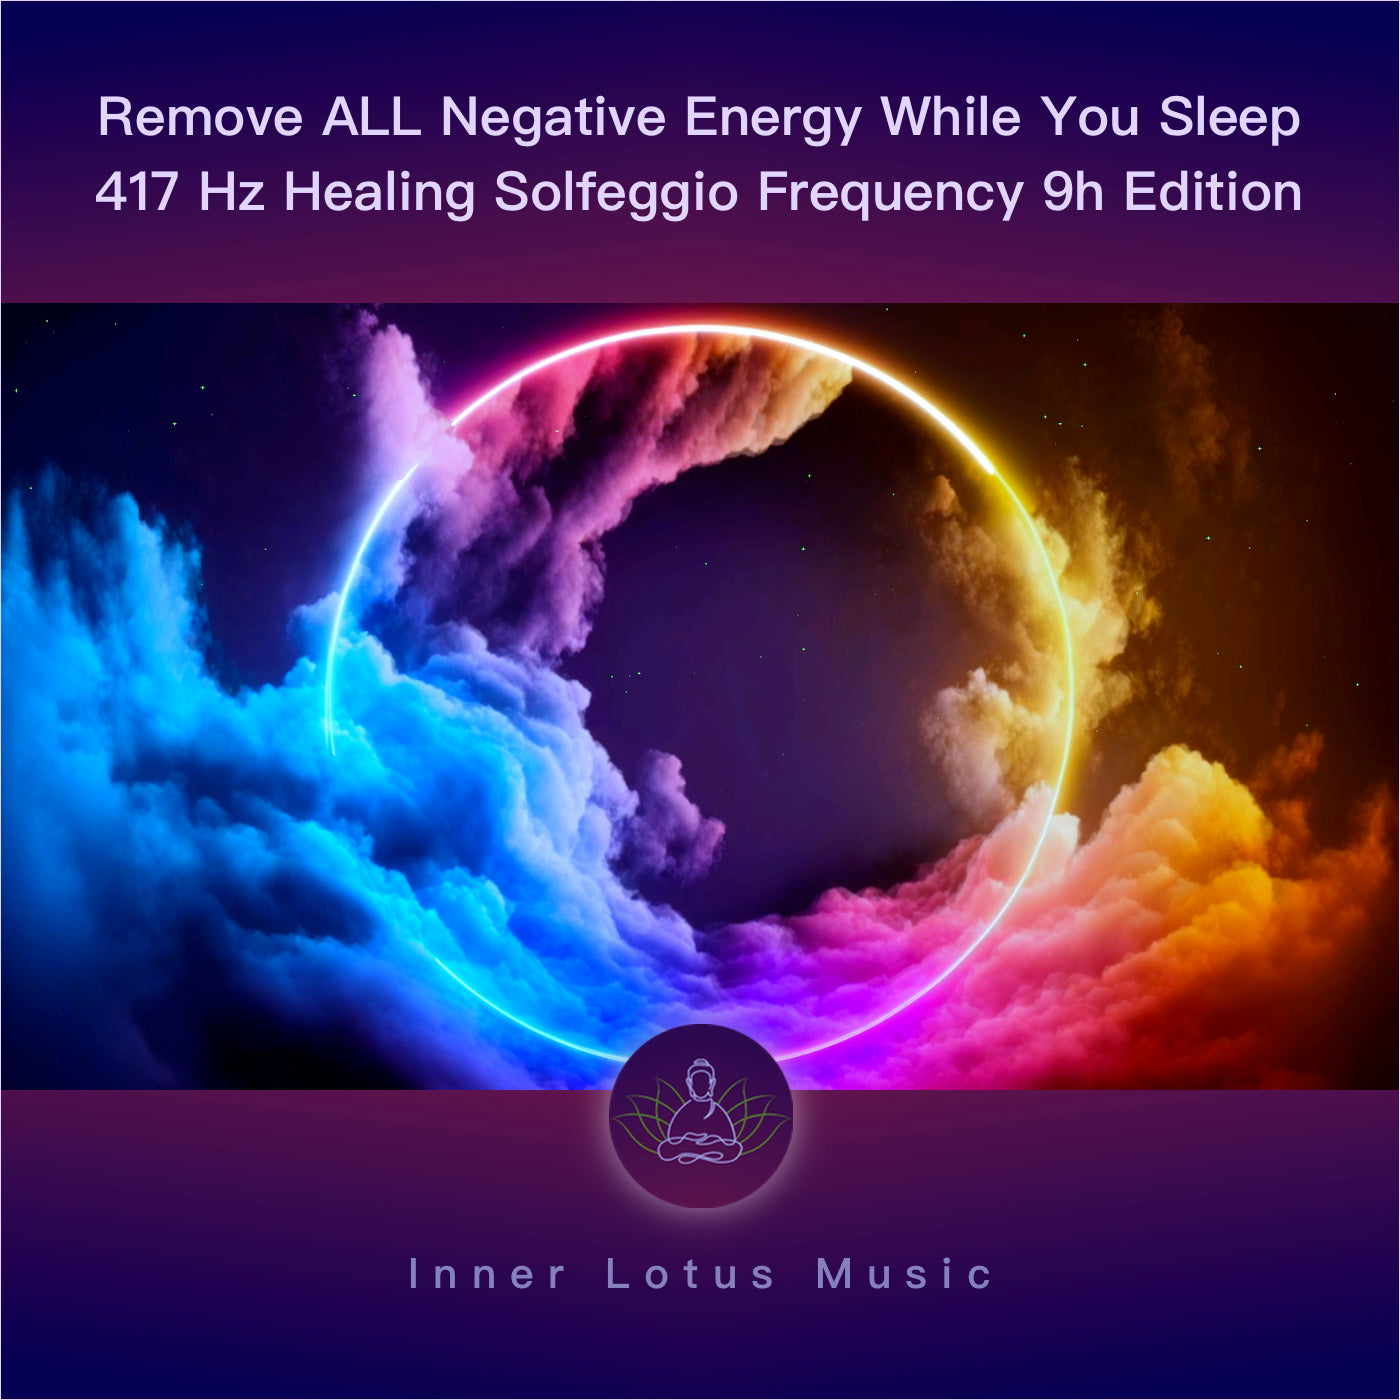 Remove ALL Negative Energy While You Sleep | 417 Hz Healing Solfeggio Frequency 9h Edition